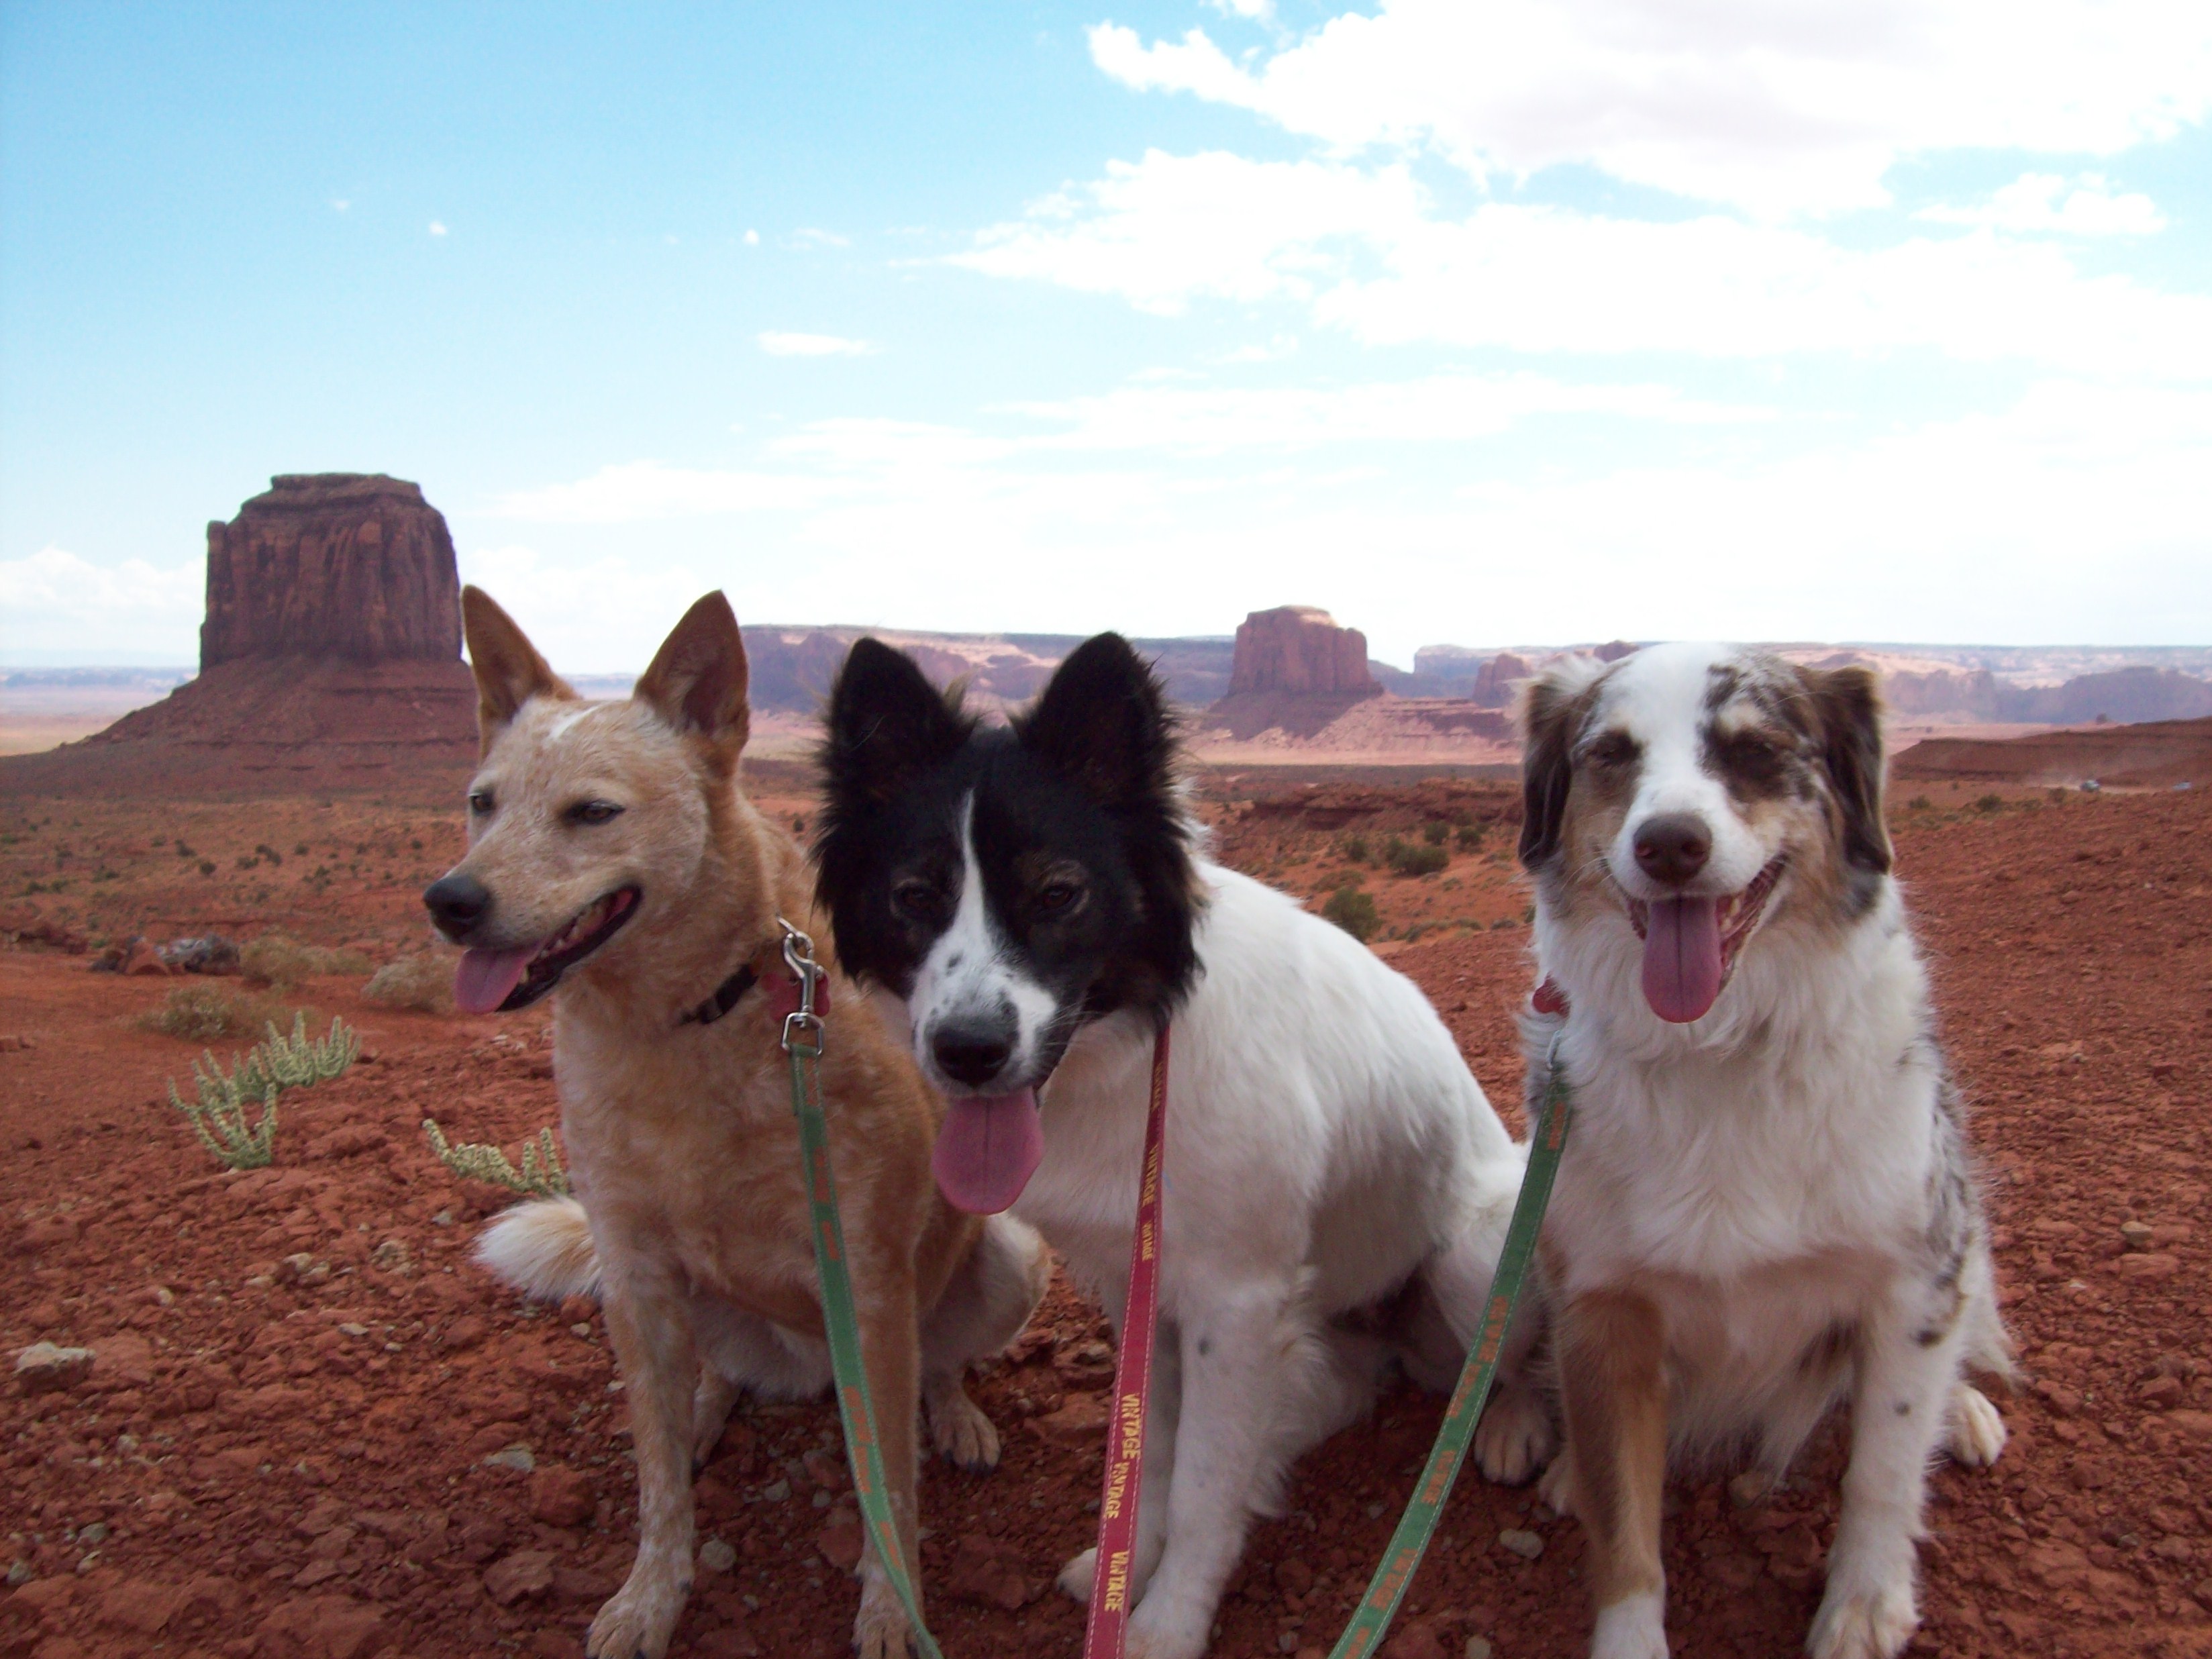 The Girls in Monument Valley